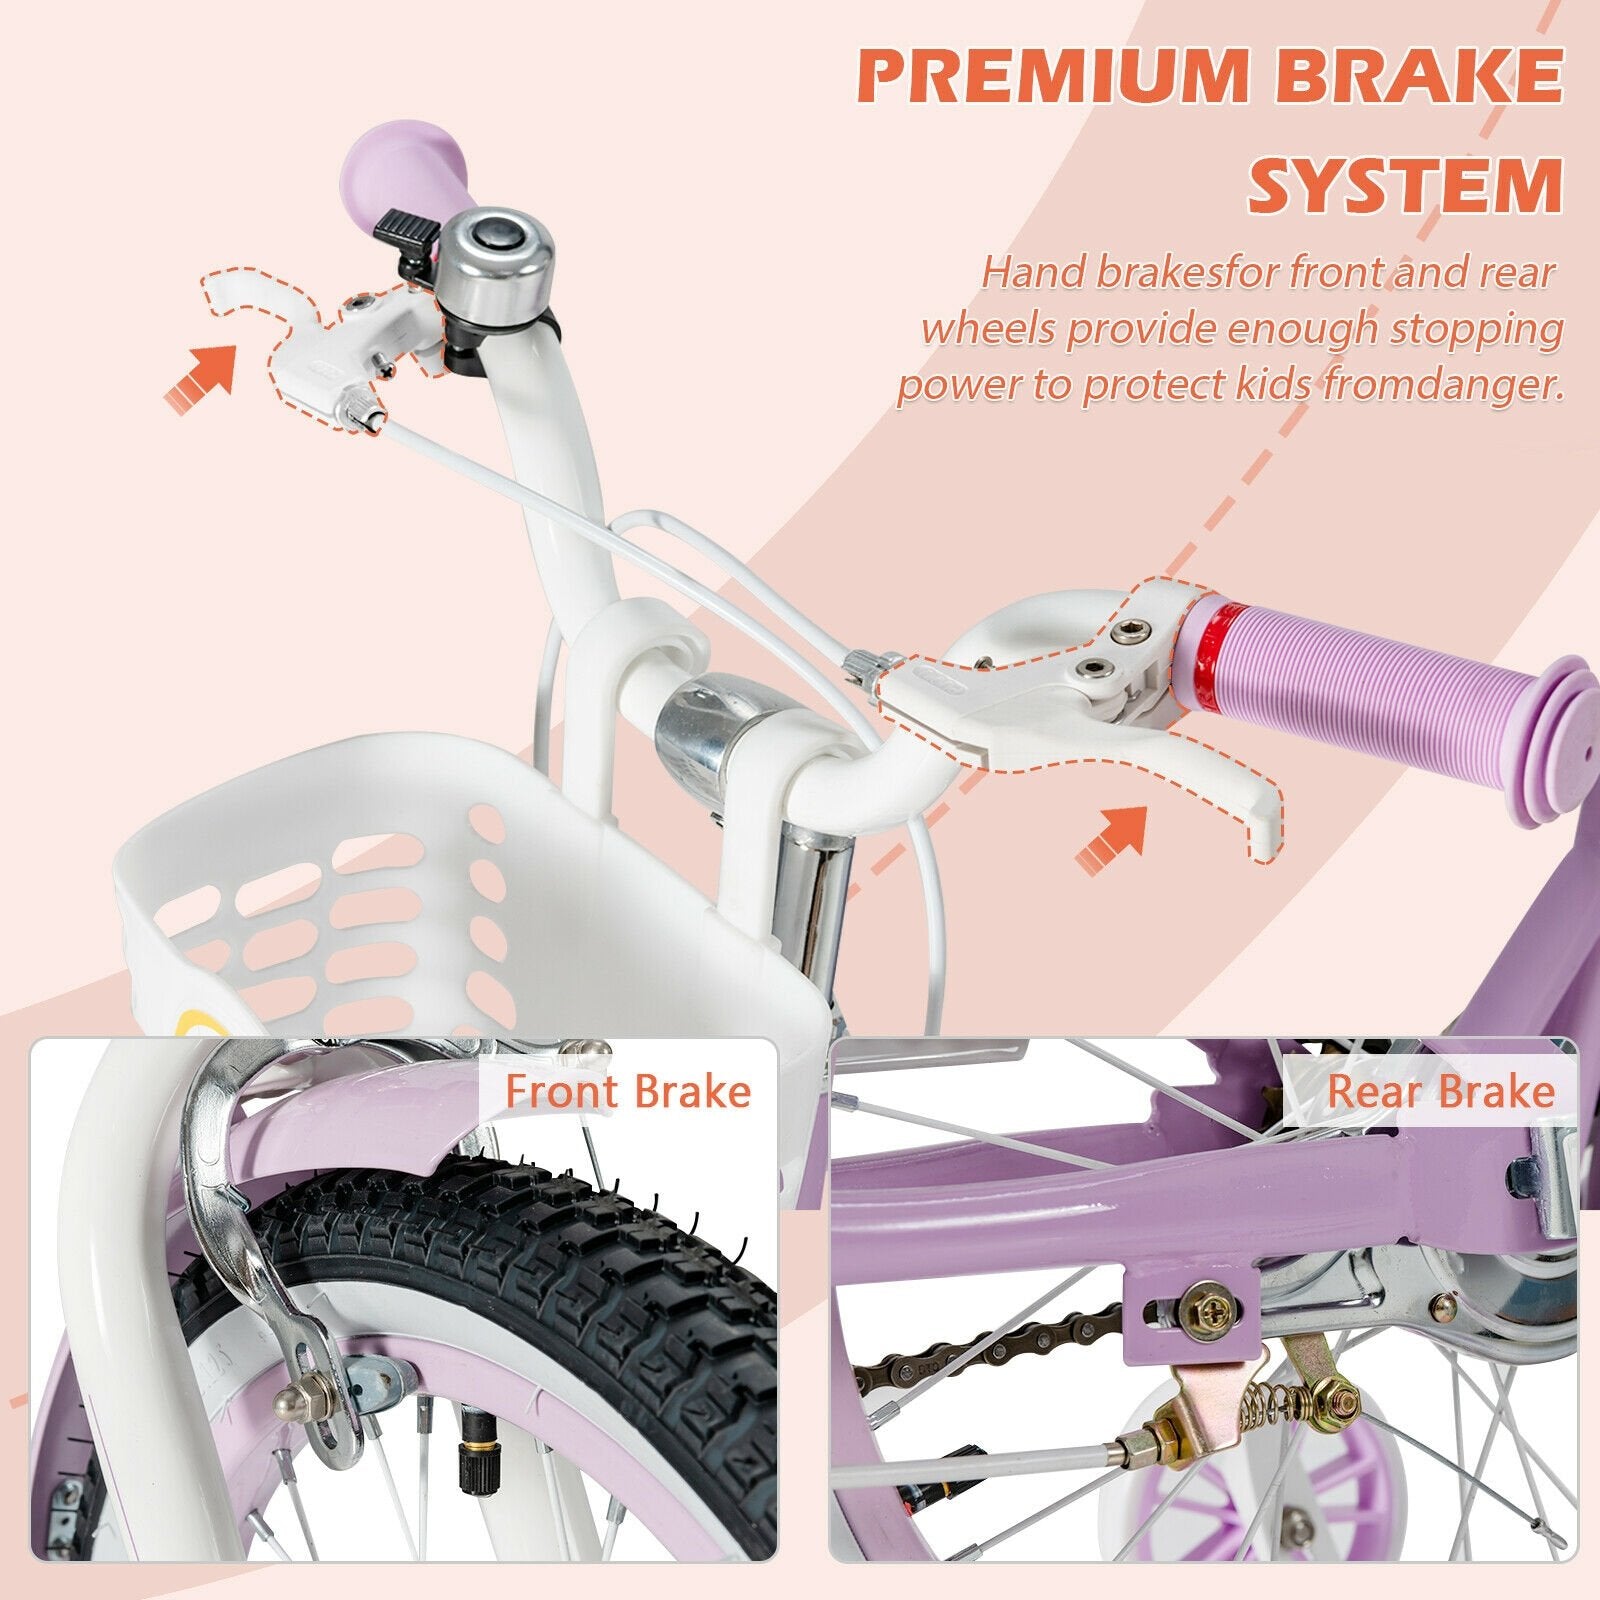 18 Inch Kids Adjustable Bike with Training Wheels, Purple at Gallery Canada